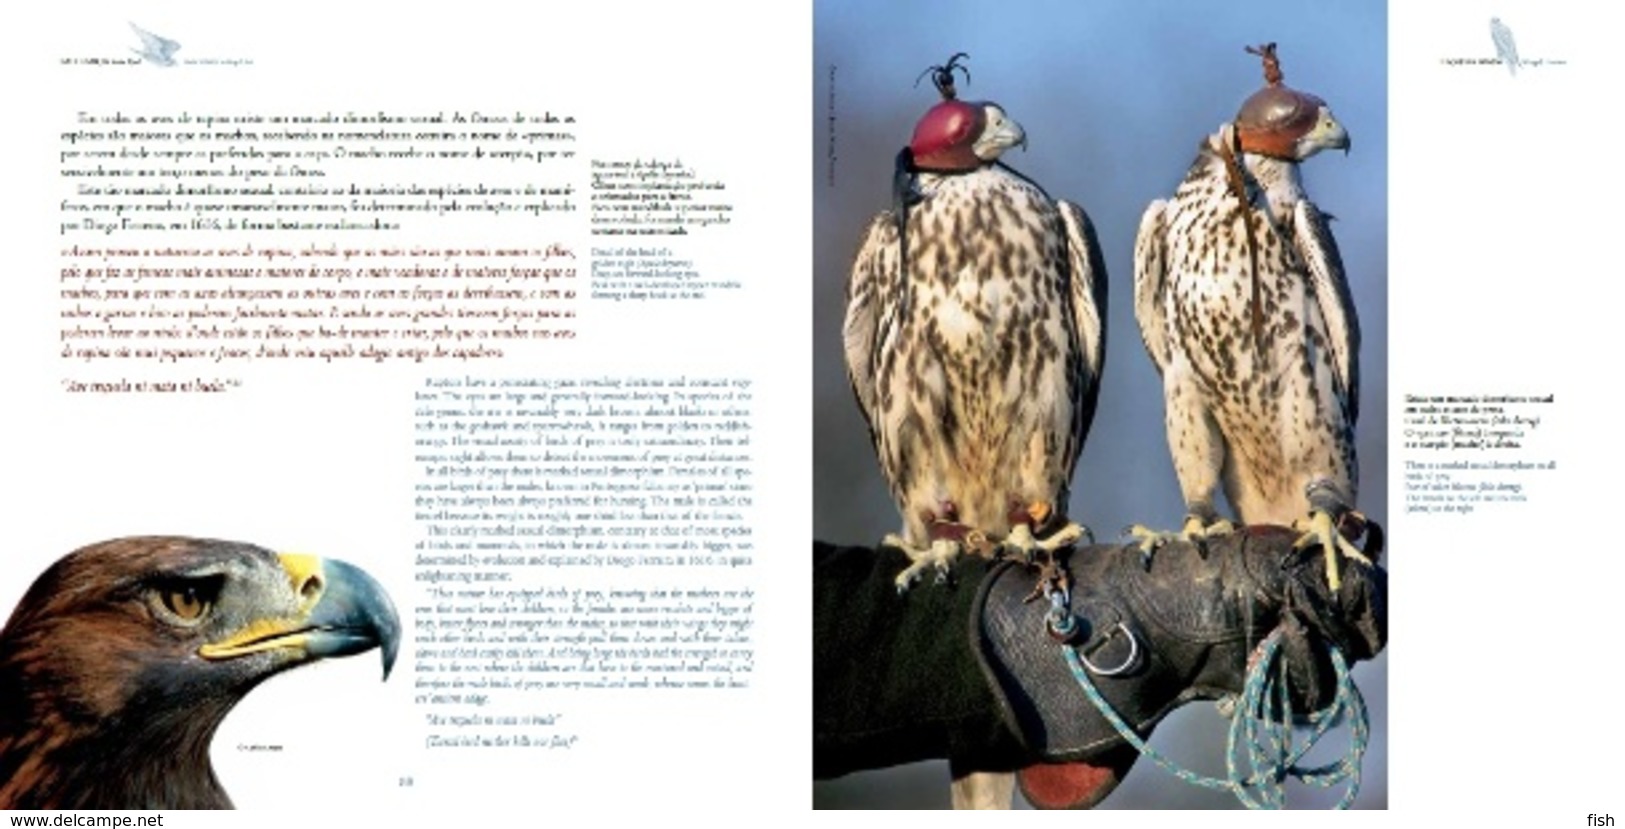 Portugal ** & CTT, Thematic Book With Stamps, Falconry Real Art 2013 (86423) - Libro Dell'anno